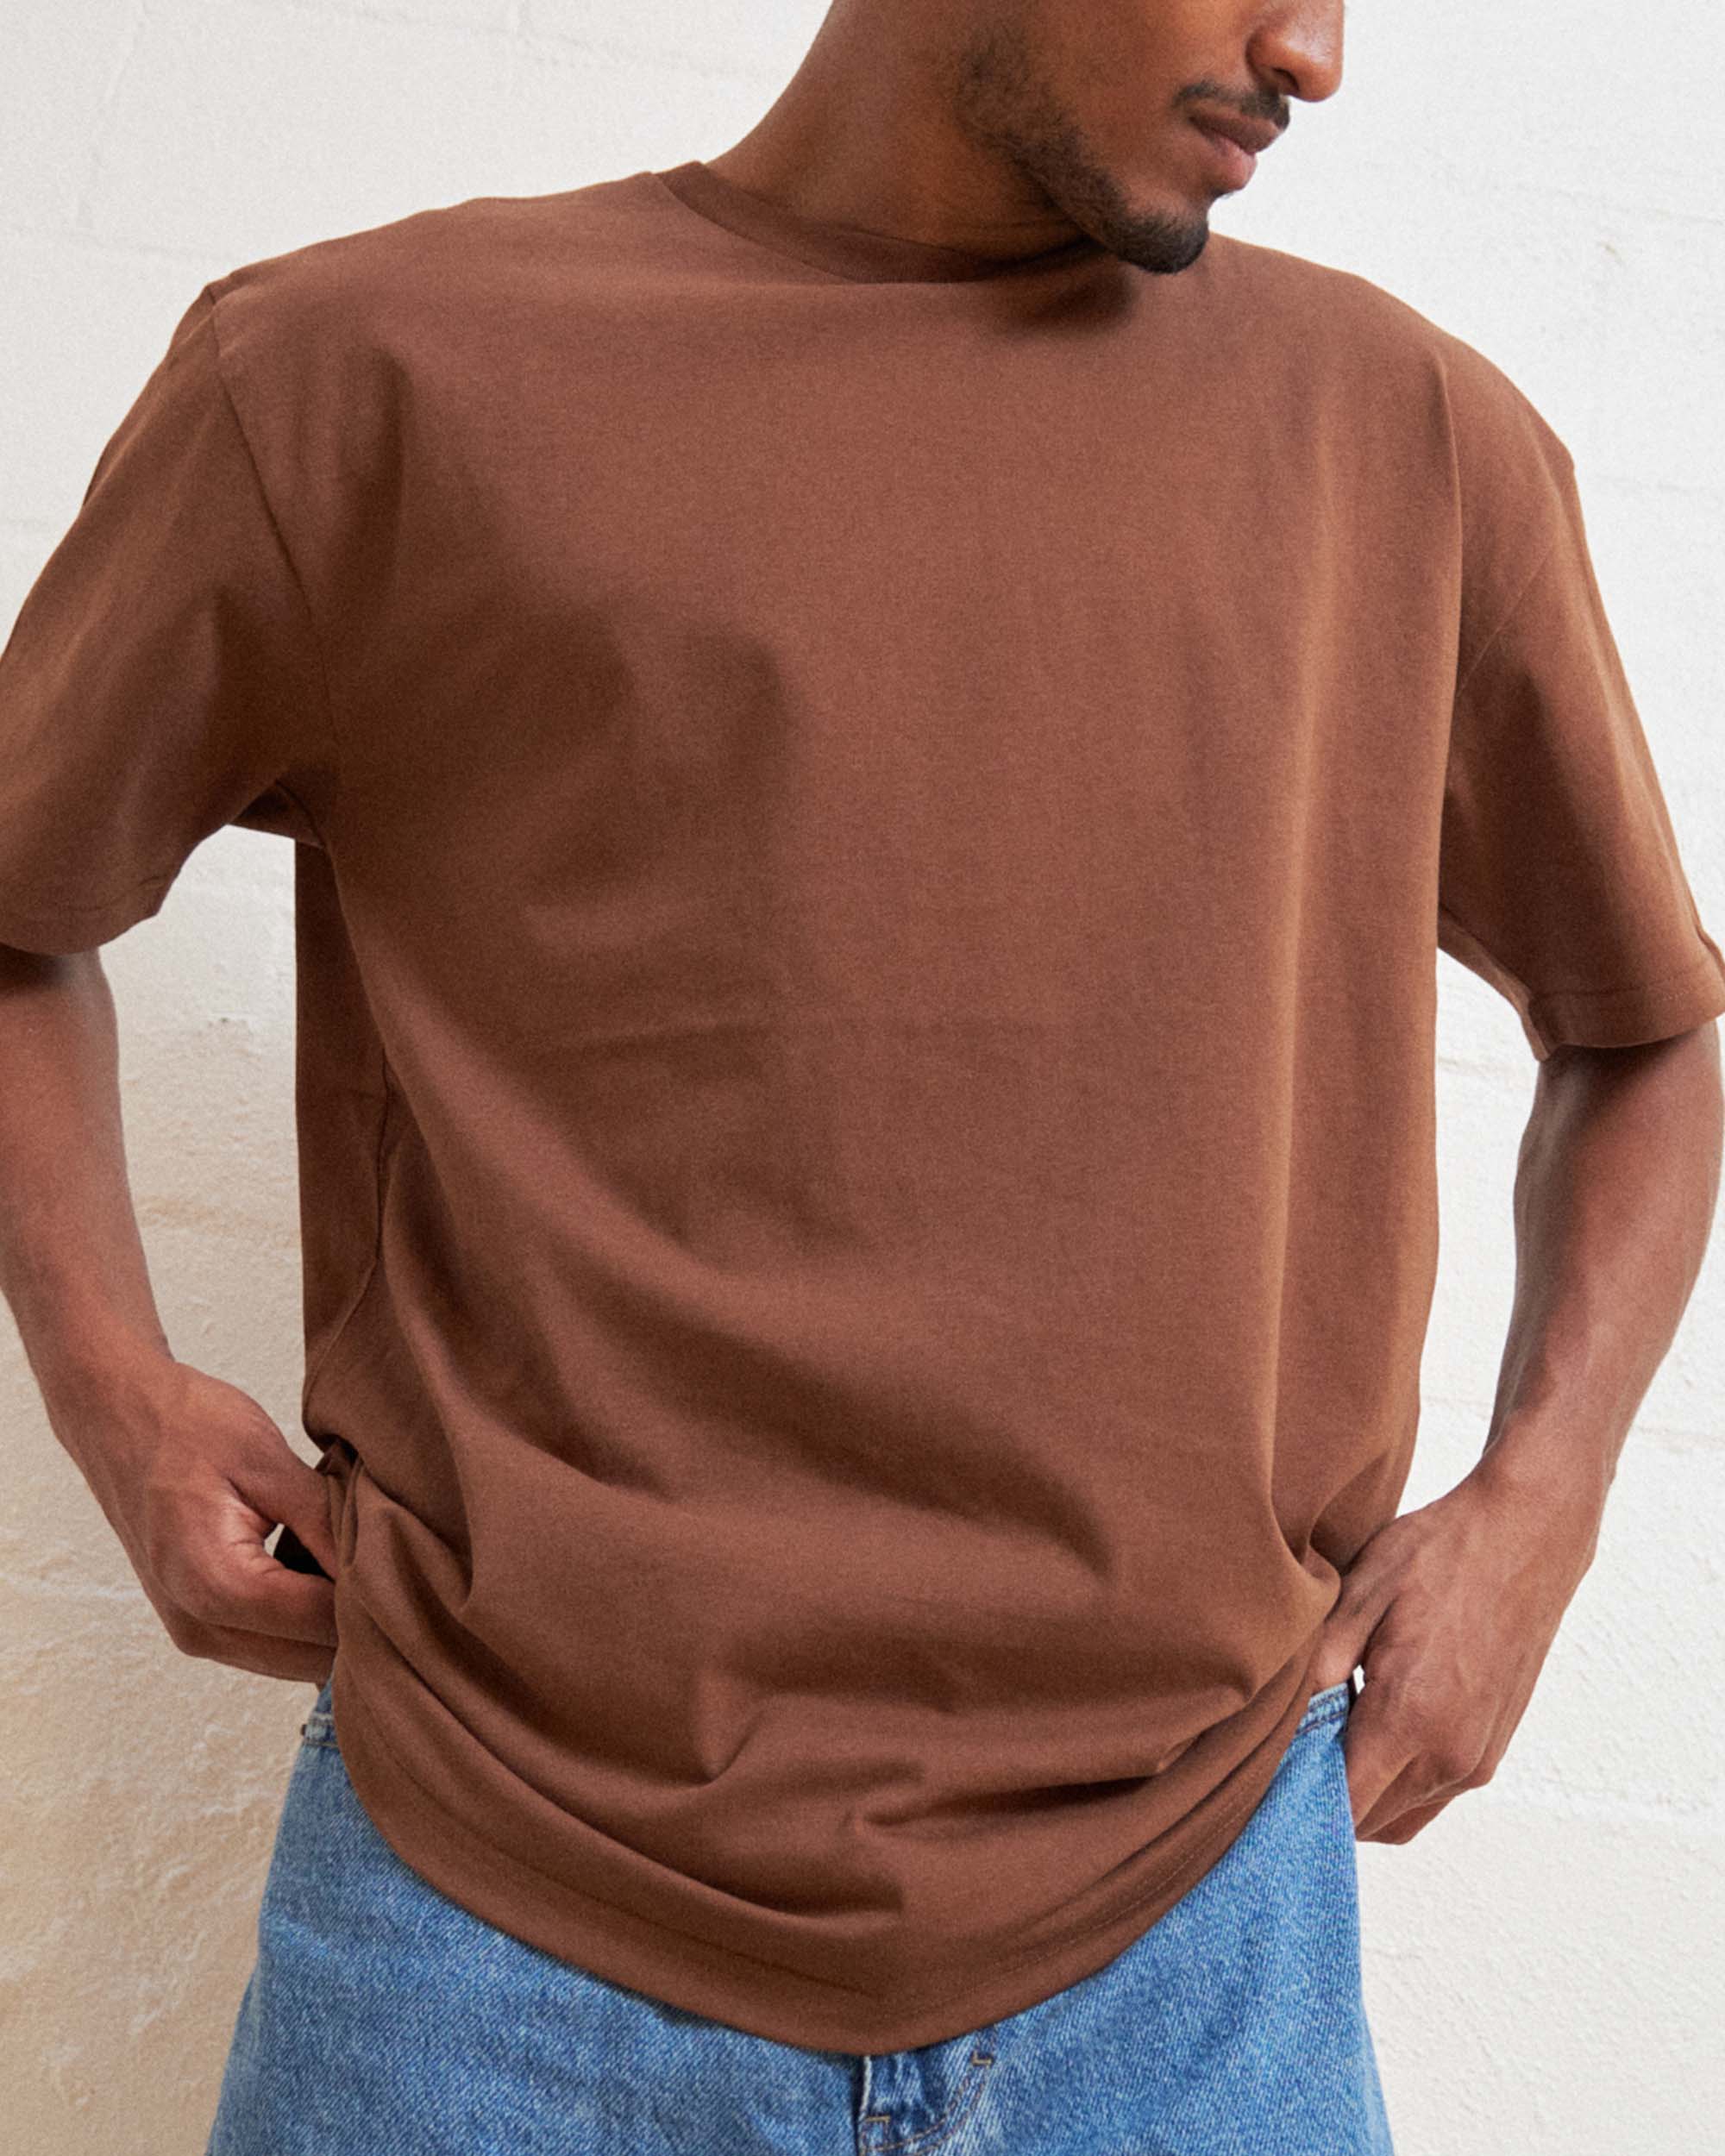 Classic Tee 8 Pack: Brown, Black, Charcoal, White